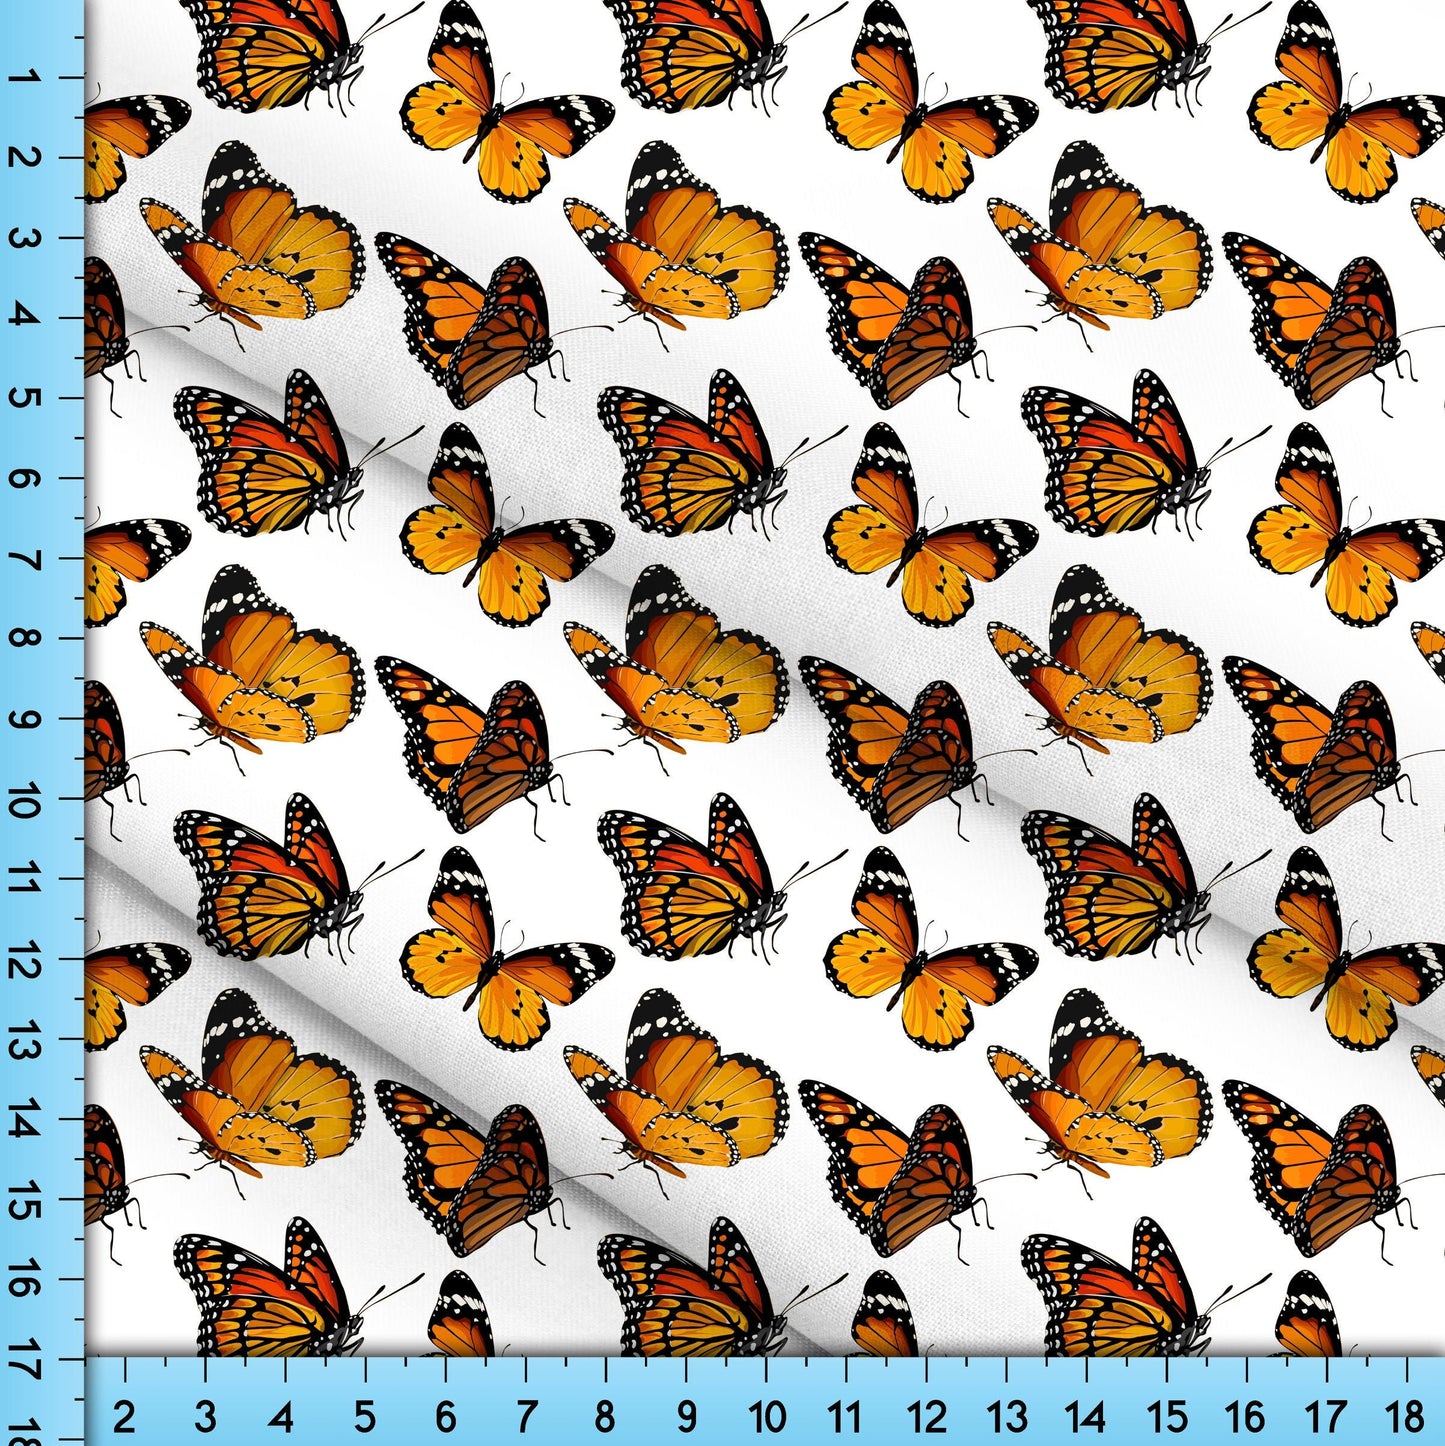 Orange Monarch Butterflies Fabric Printed by the Yard, Cottagecore Design for Crafts, Upholstery, Clothing